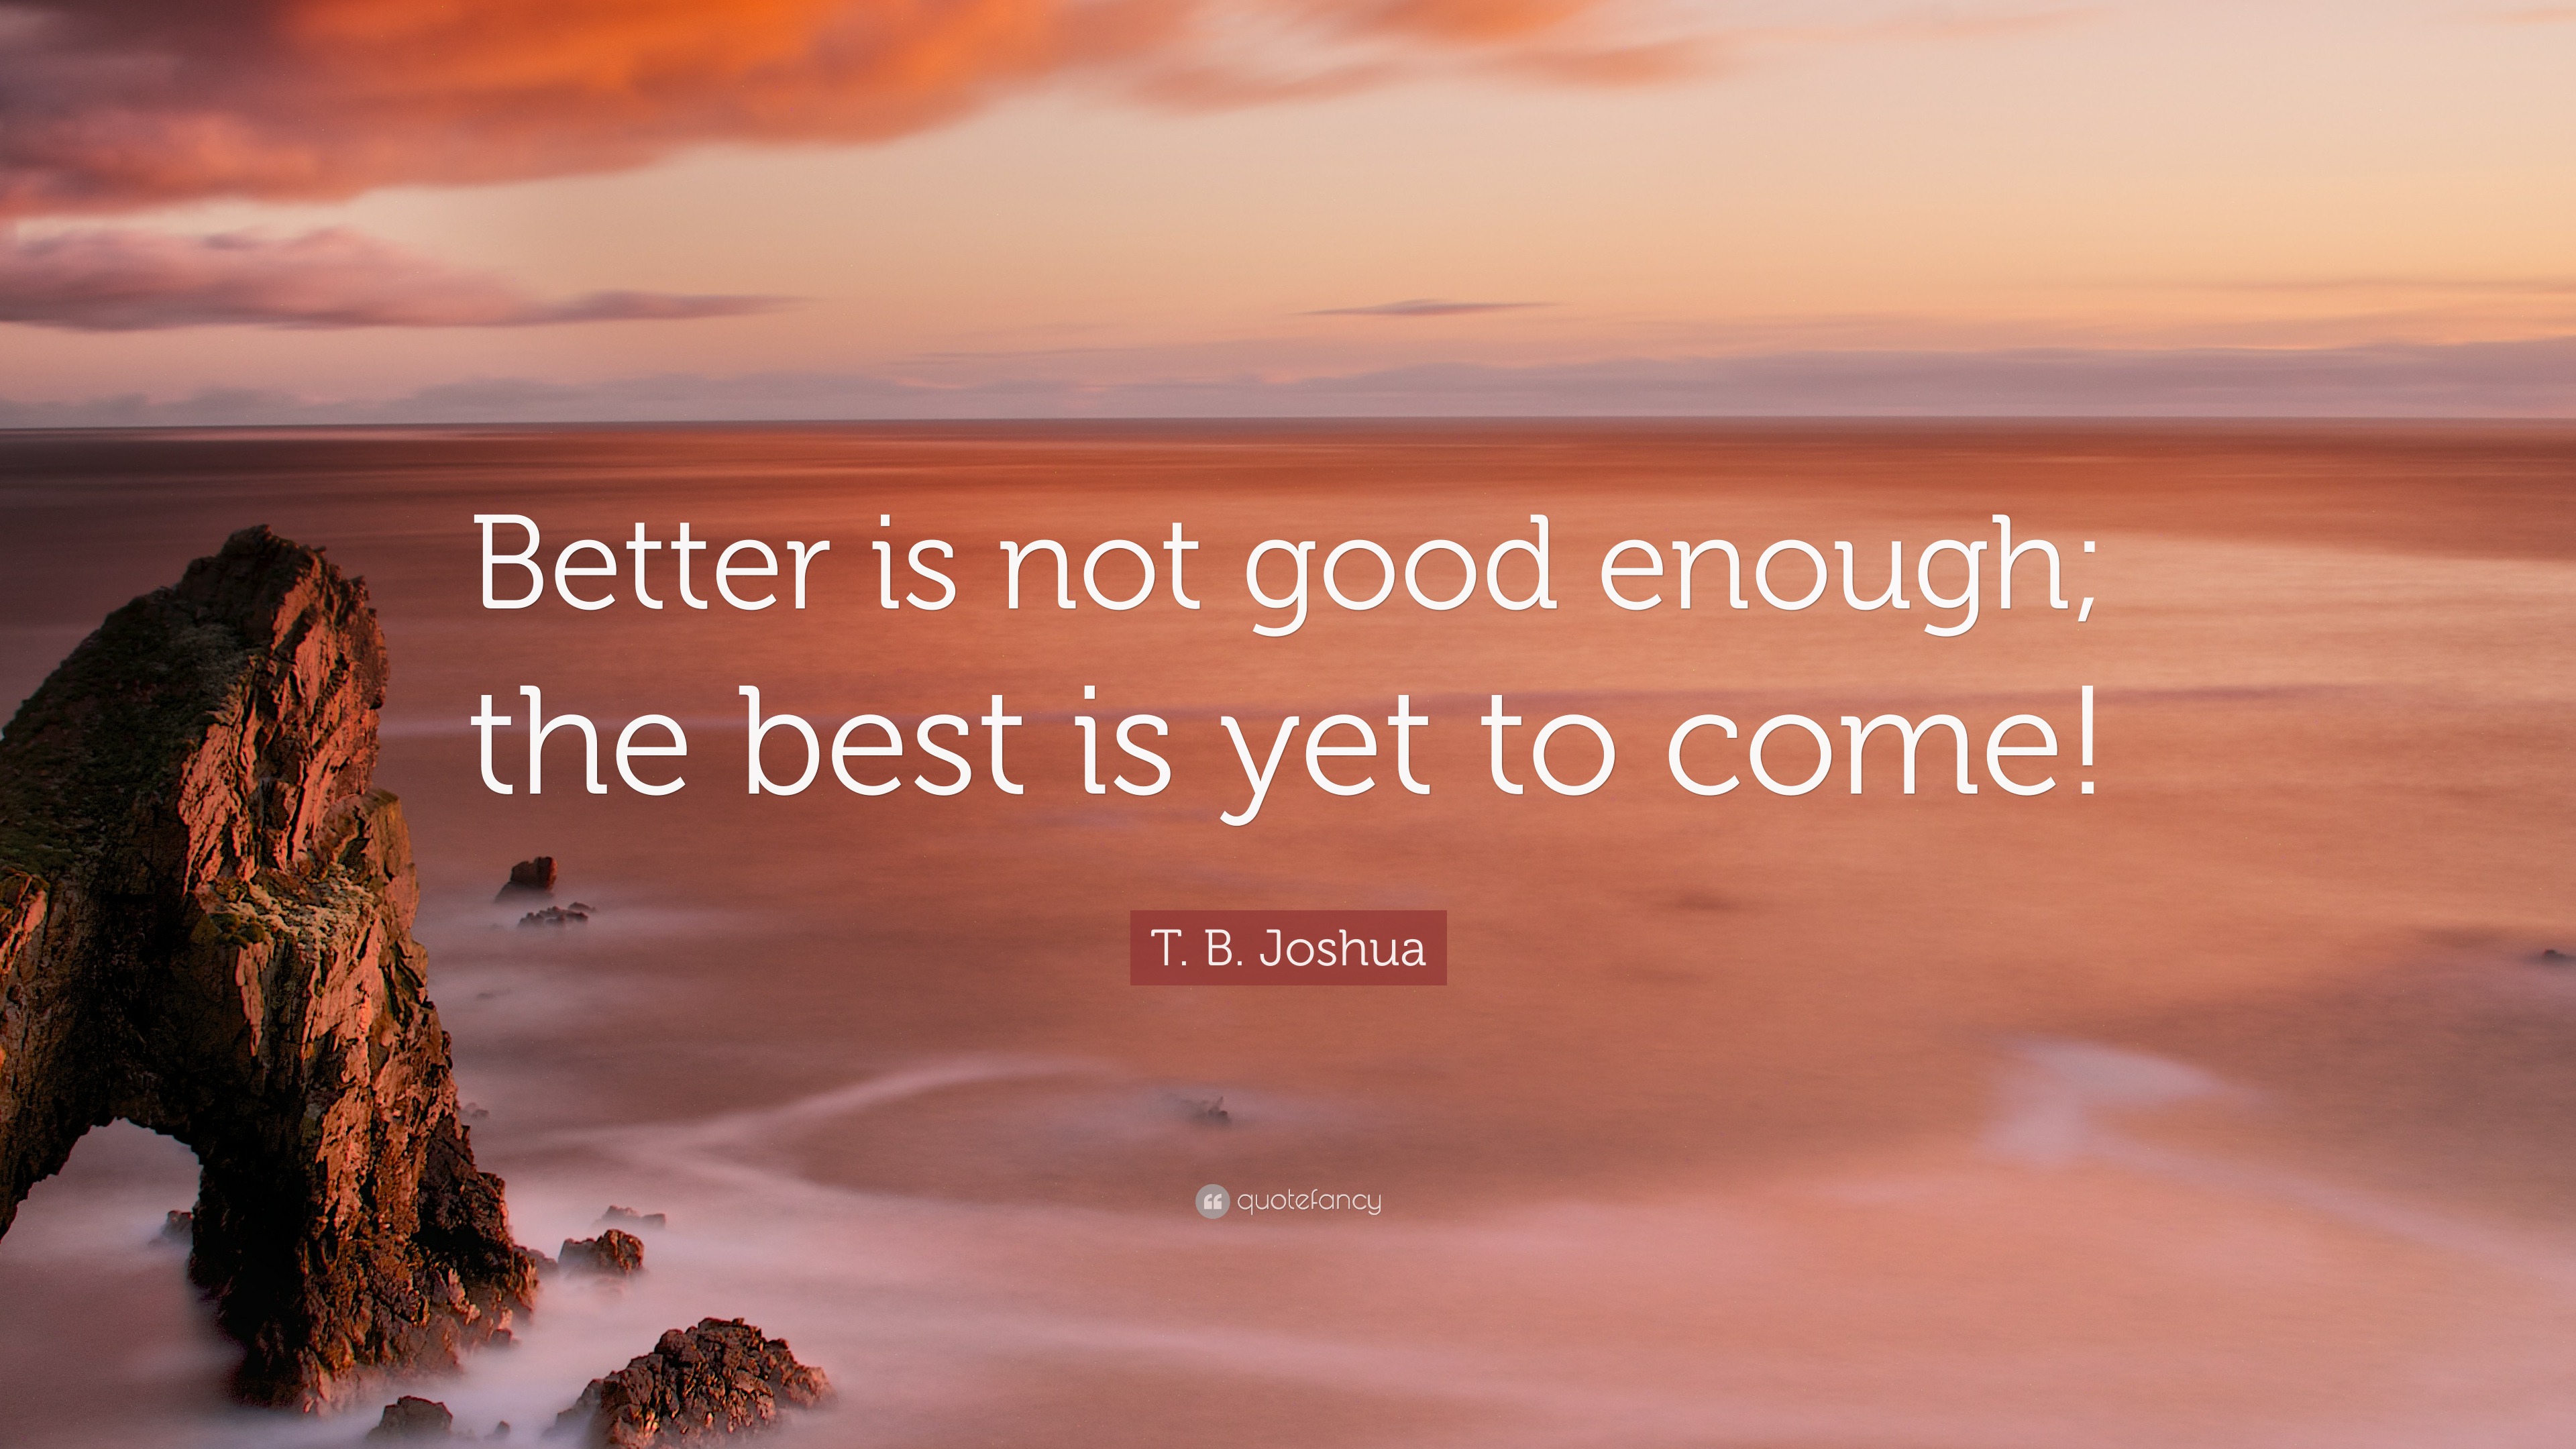 Best Is Yet To Come Quotes